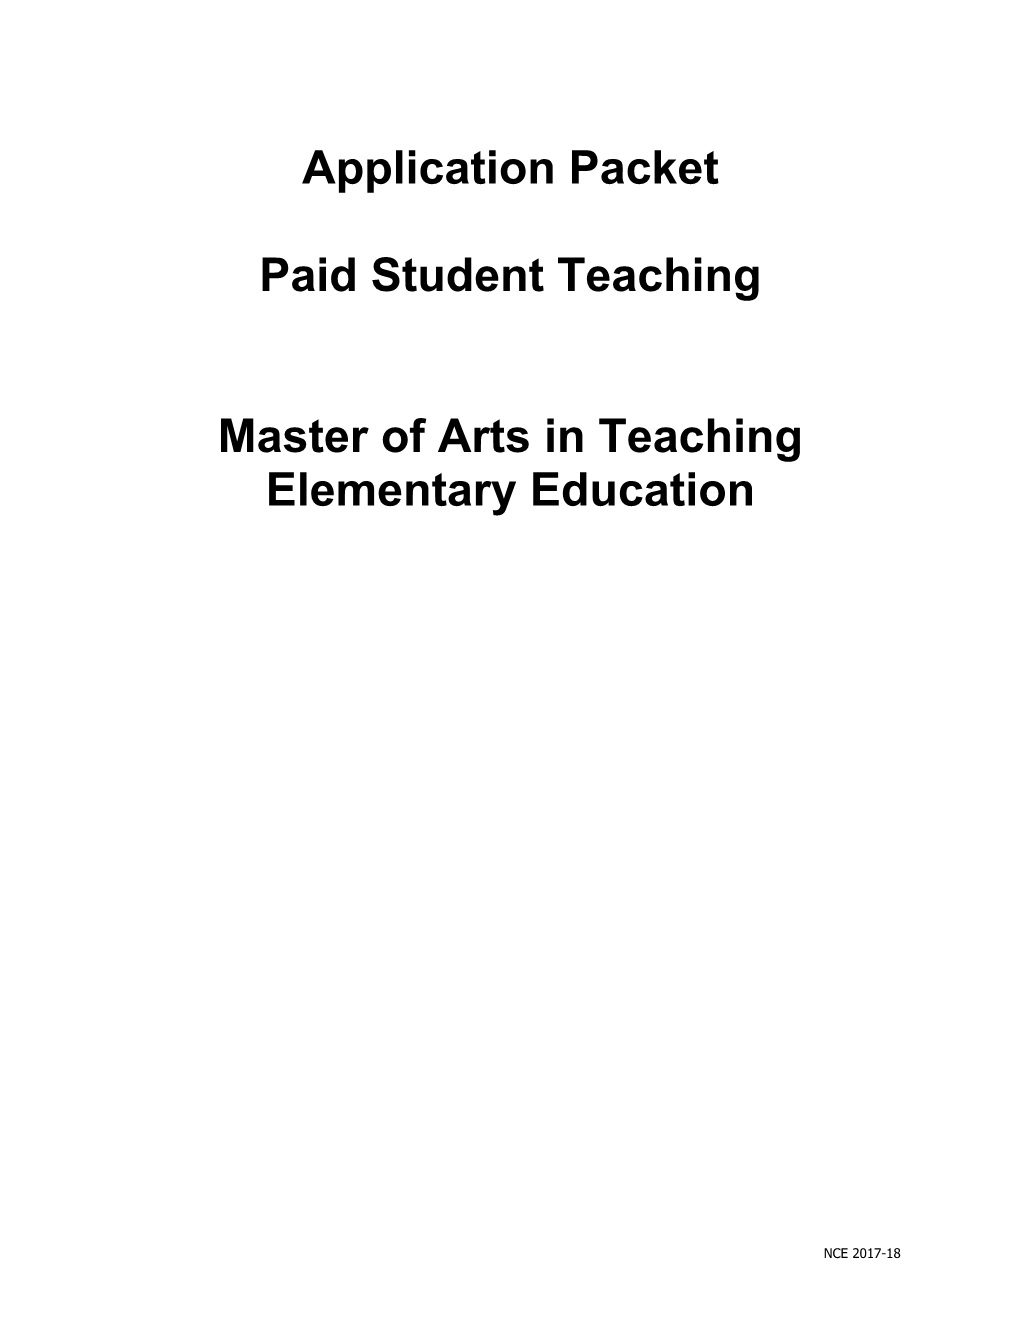 Application Packet s1